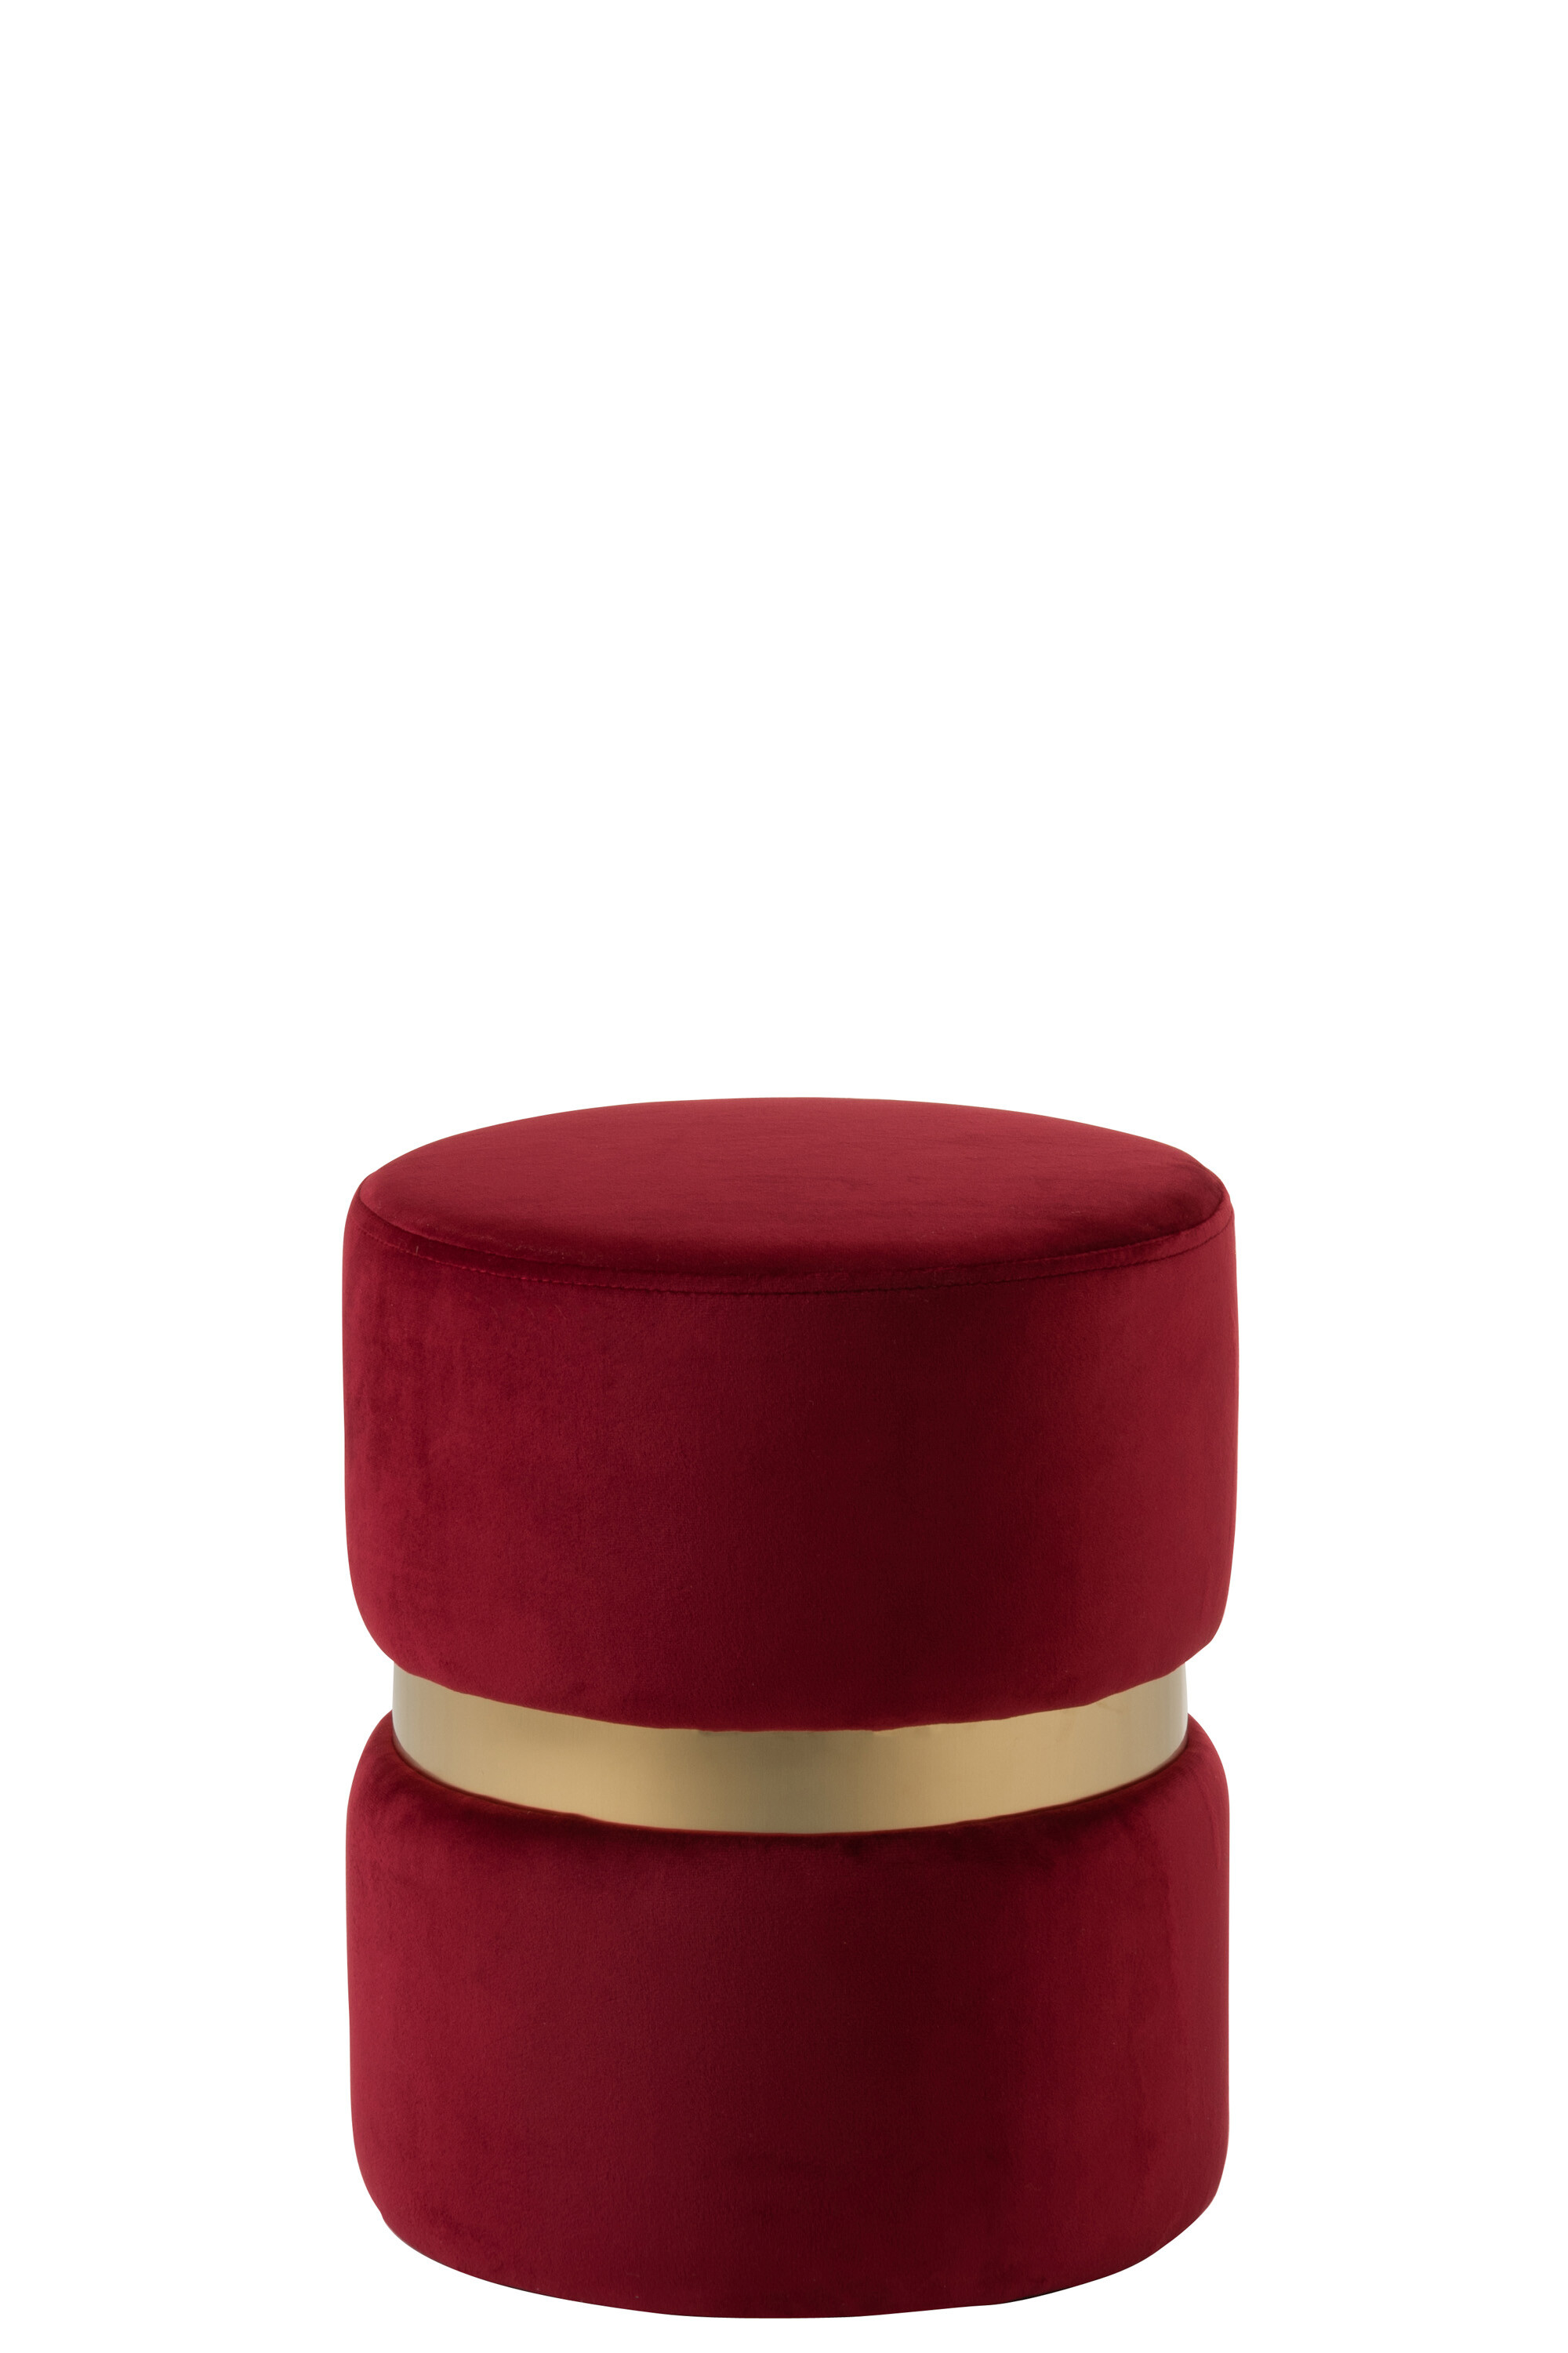 POUF ROND VELOURS ROUGE/OR